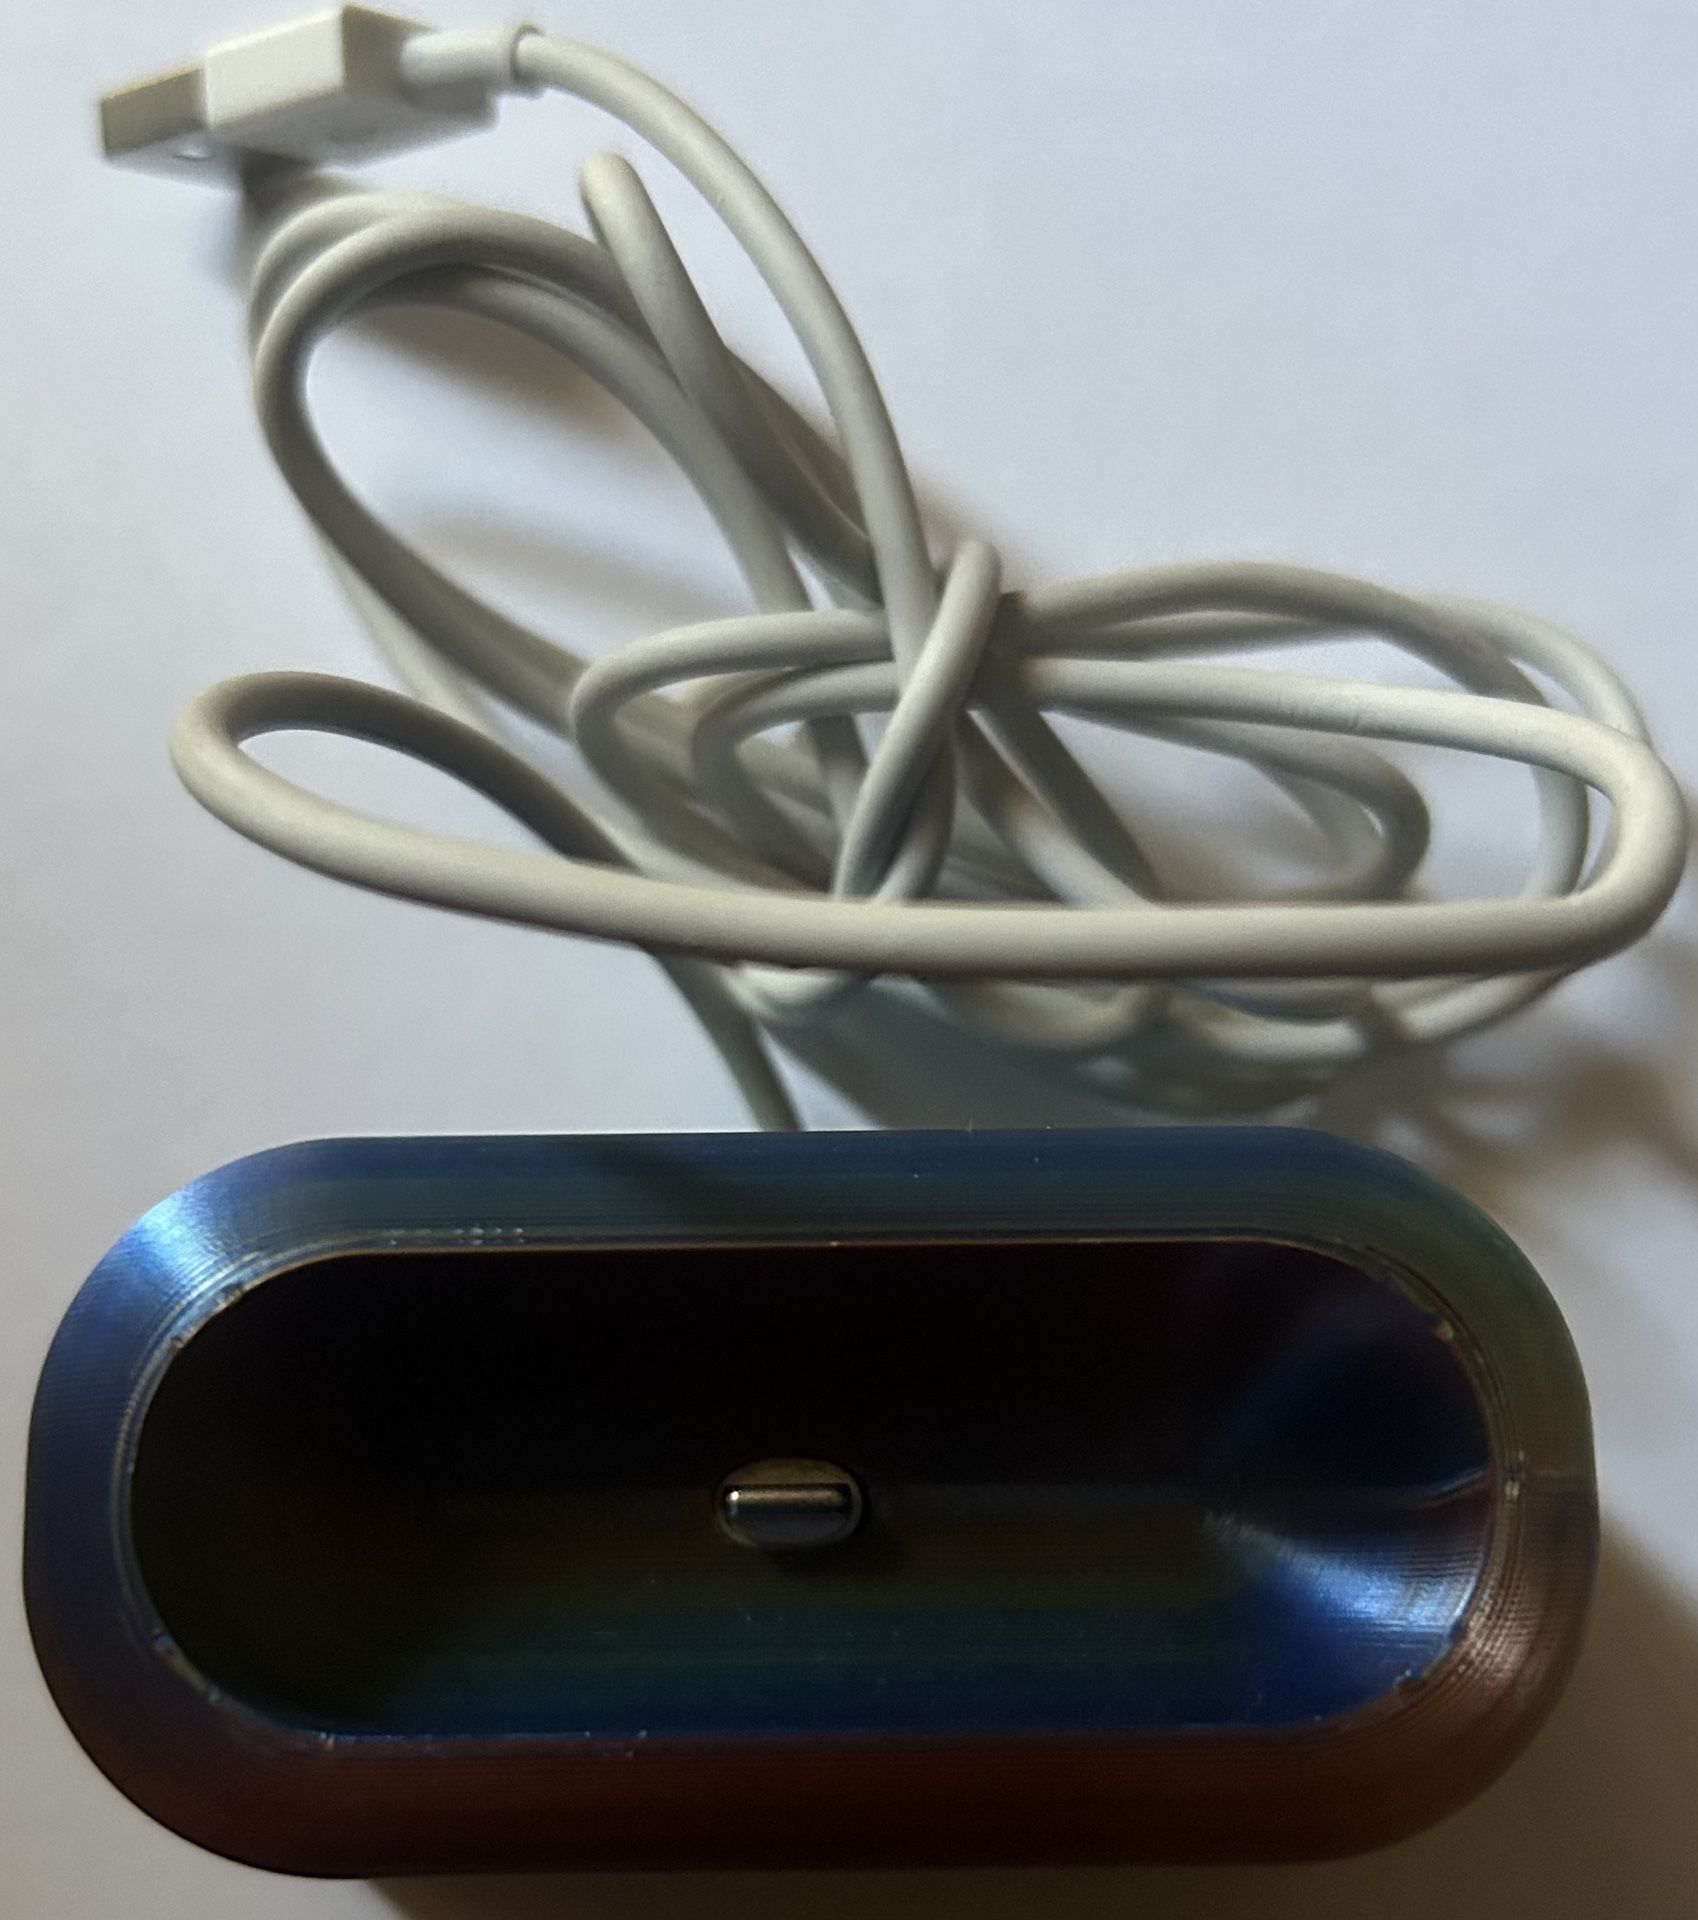 3d Printed AirPods Pro’s Charging Dock 